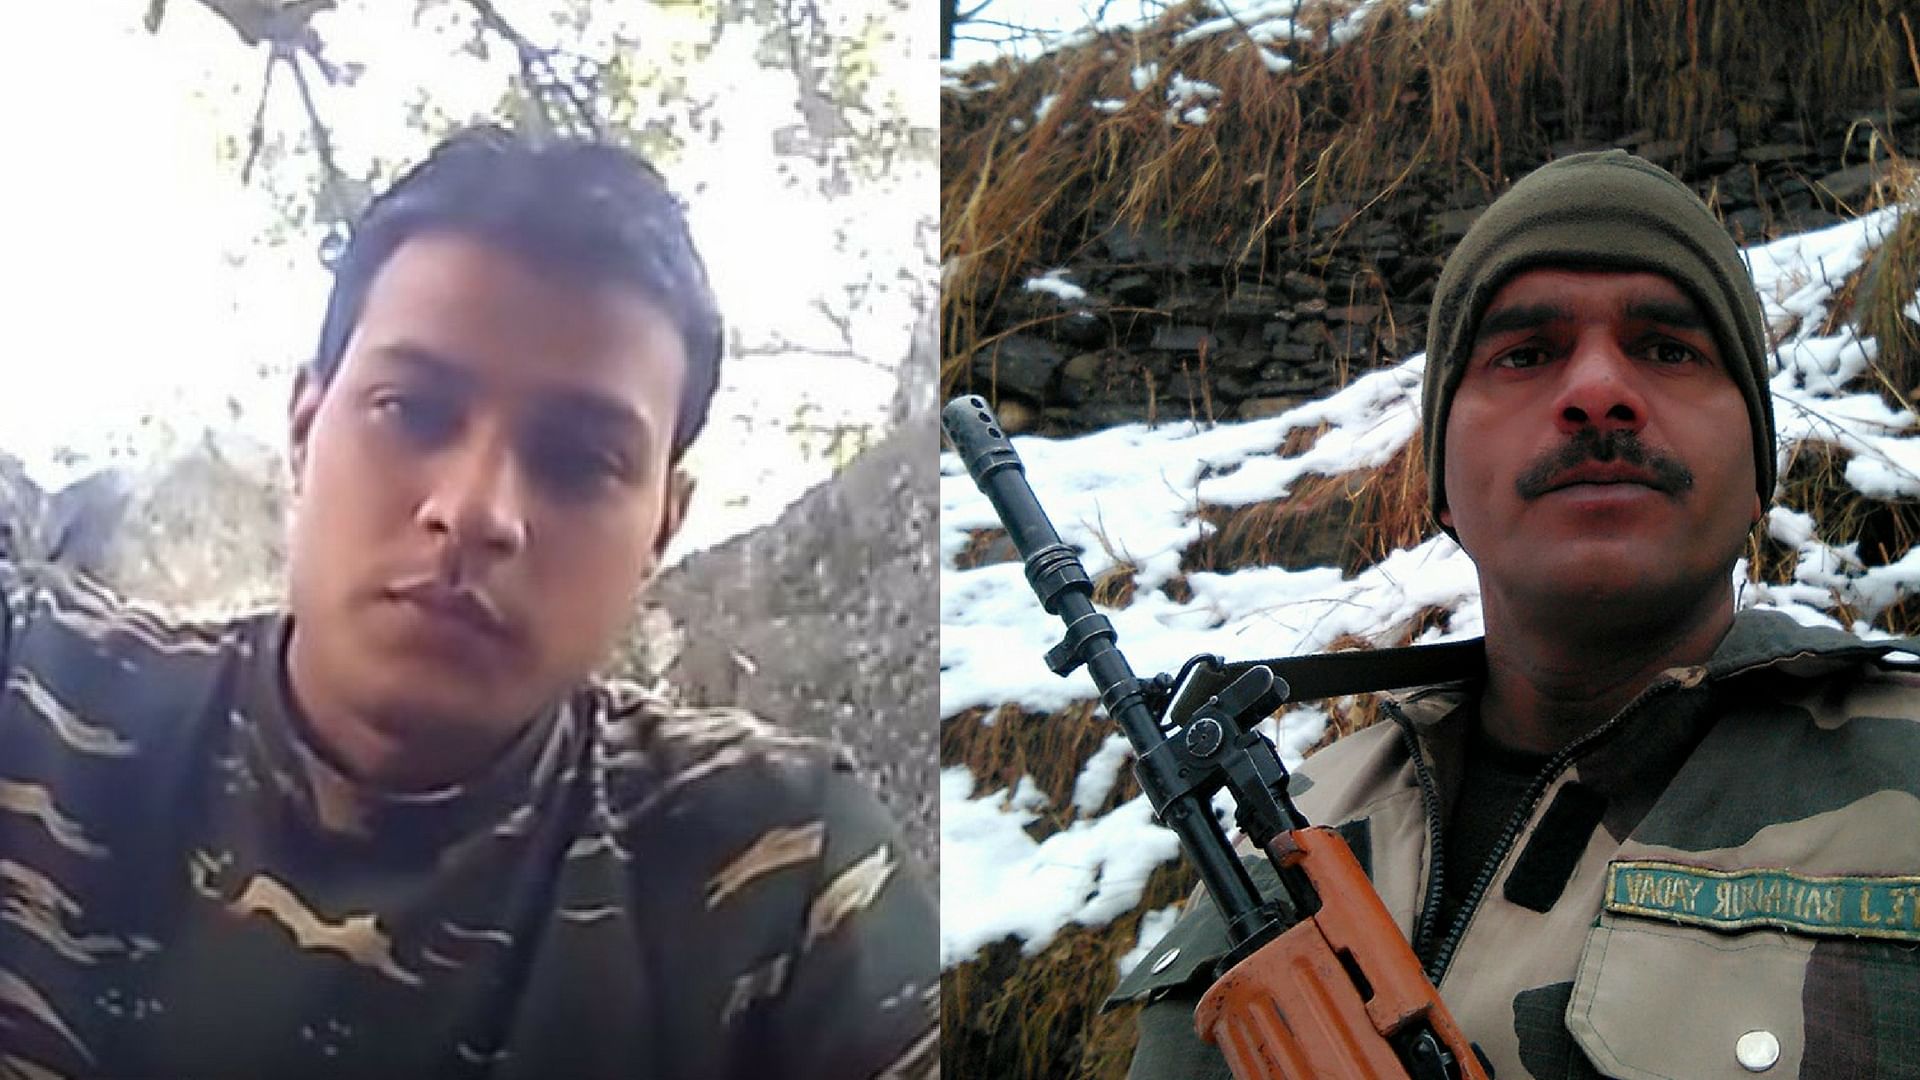 CRPF personnel and BSF jawan talk about lack of facilities in two different videos that went viral. (Photo: ANI screengrabs, Image altered by The Quint)